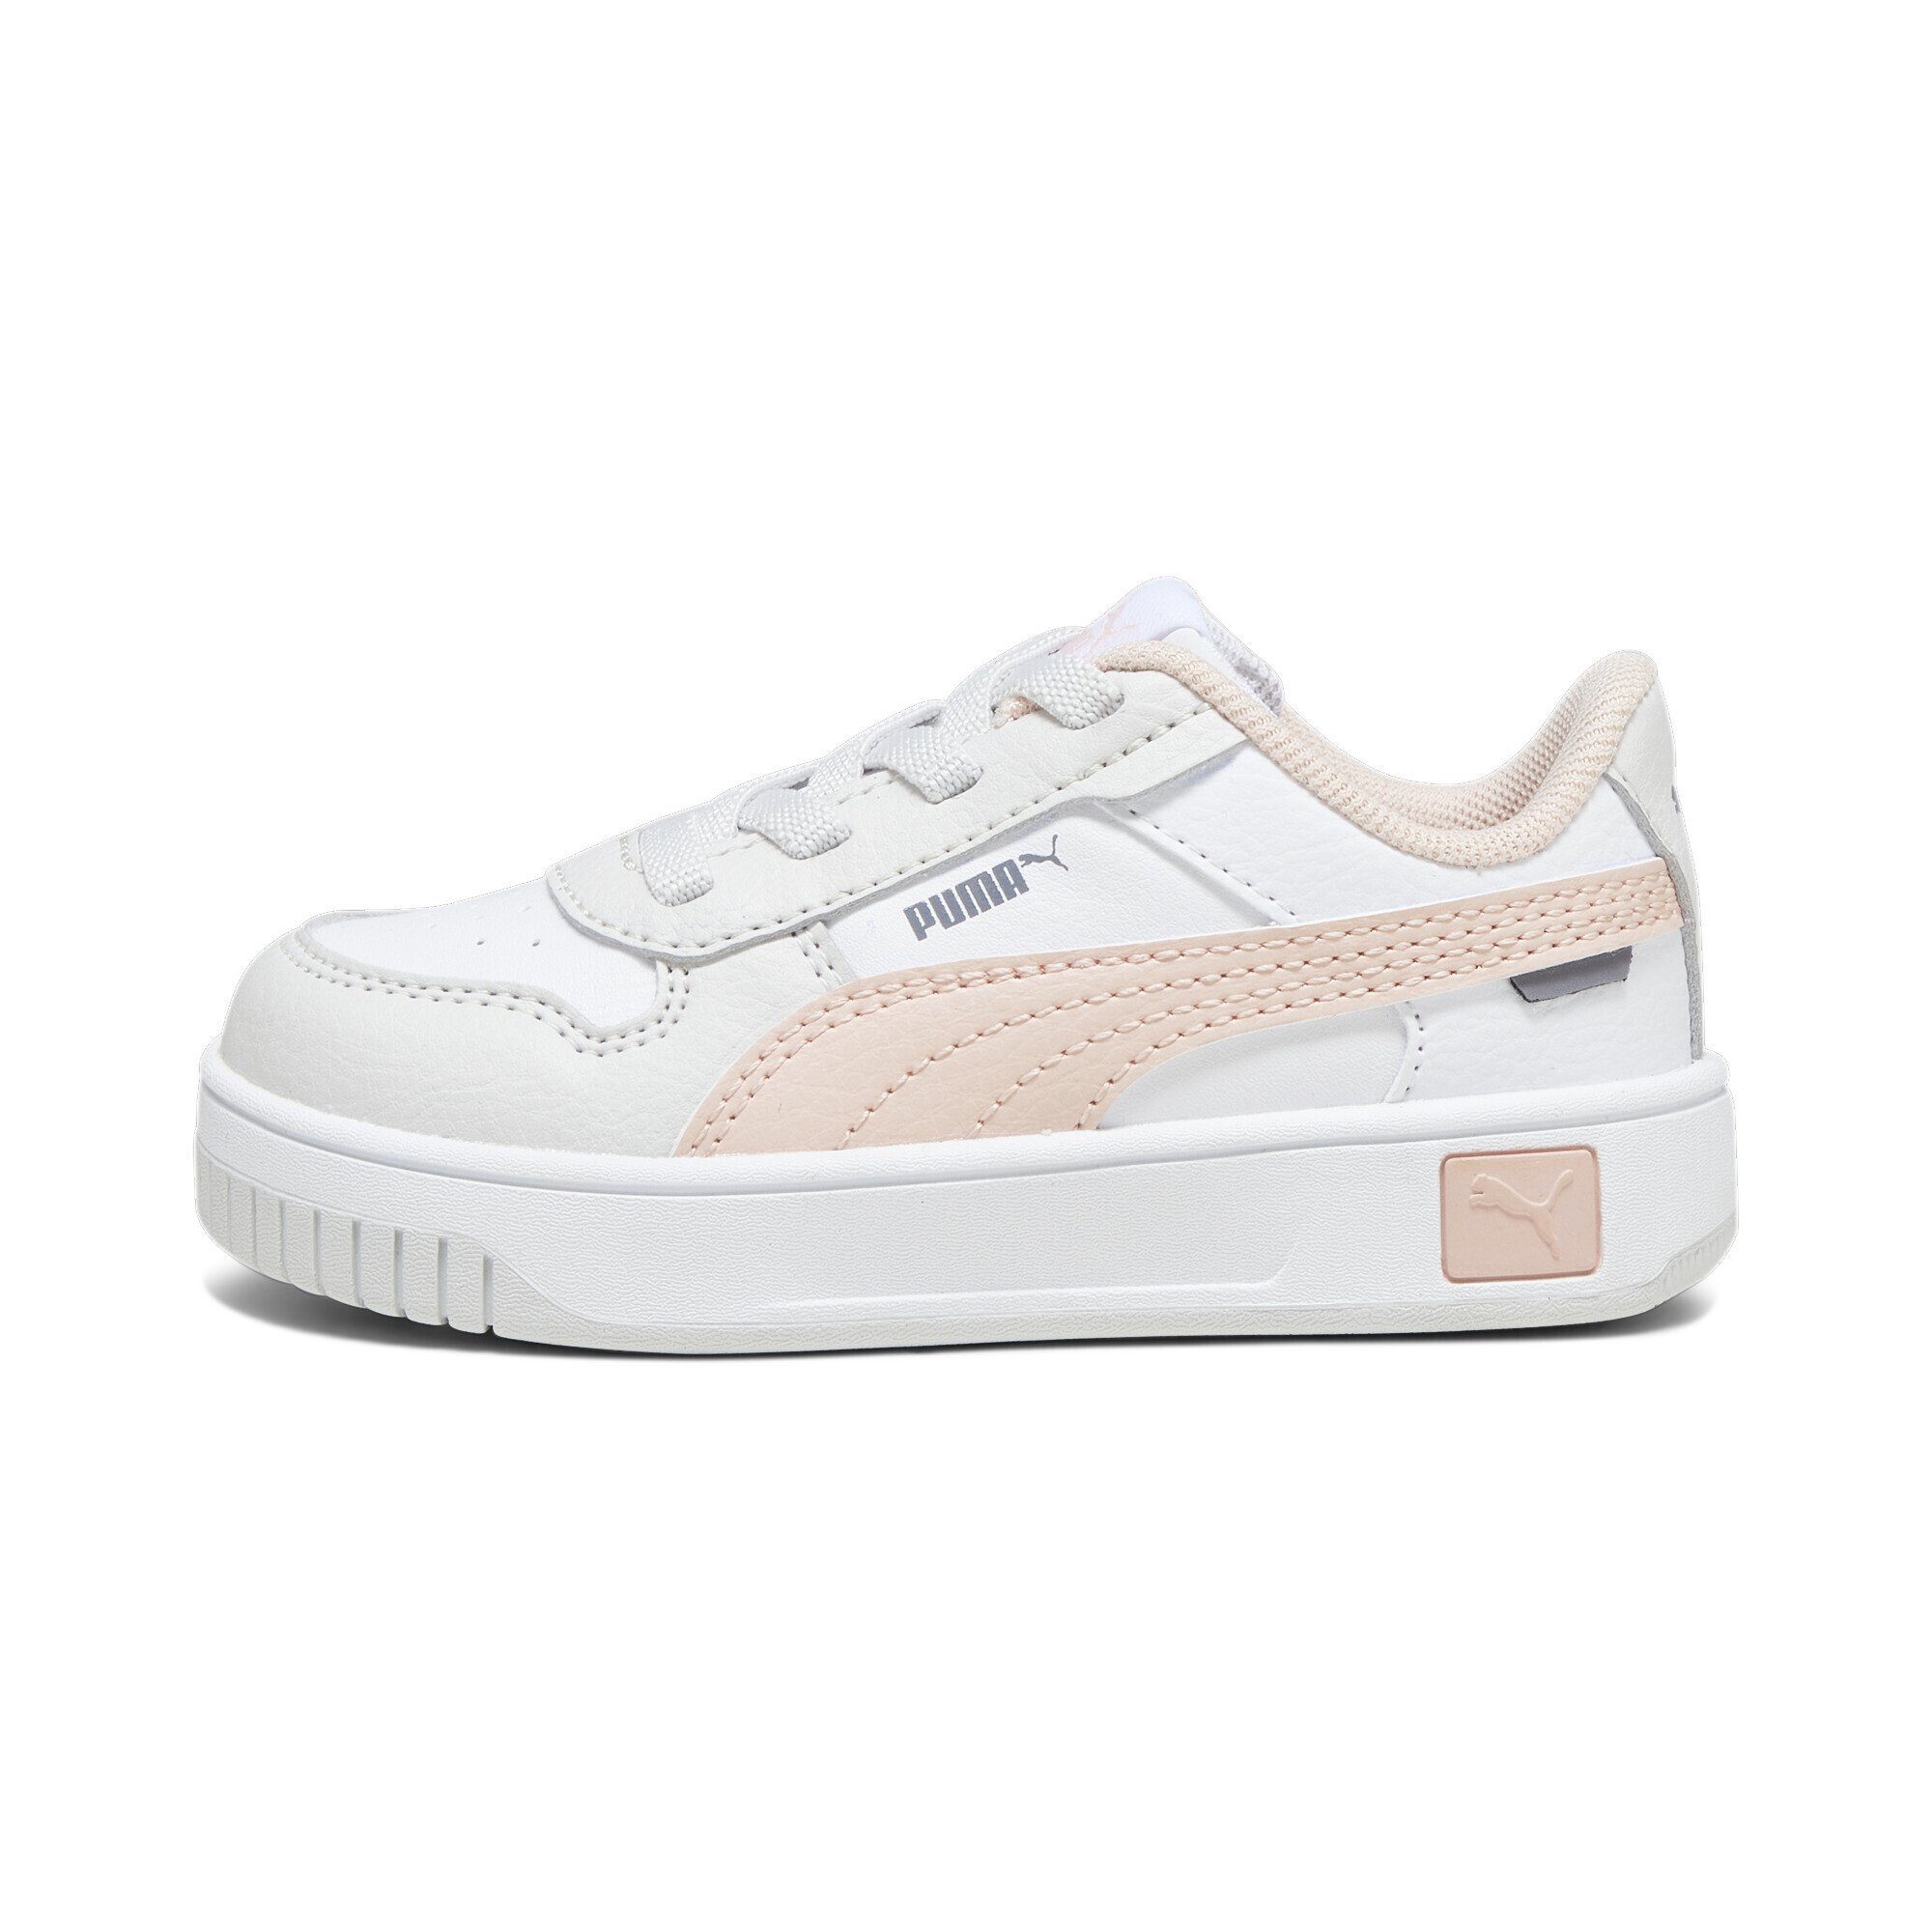 Mädchen Sneaker Sneakers Gray White Carina Rose Feather Pink Dust Street PUMA